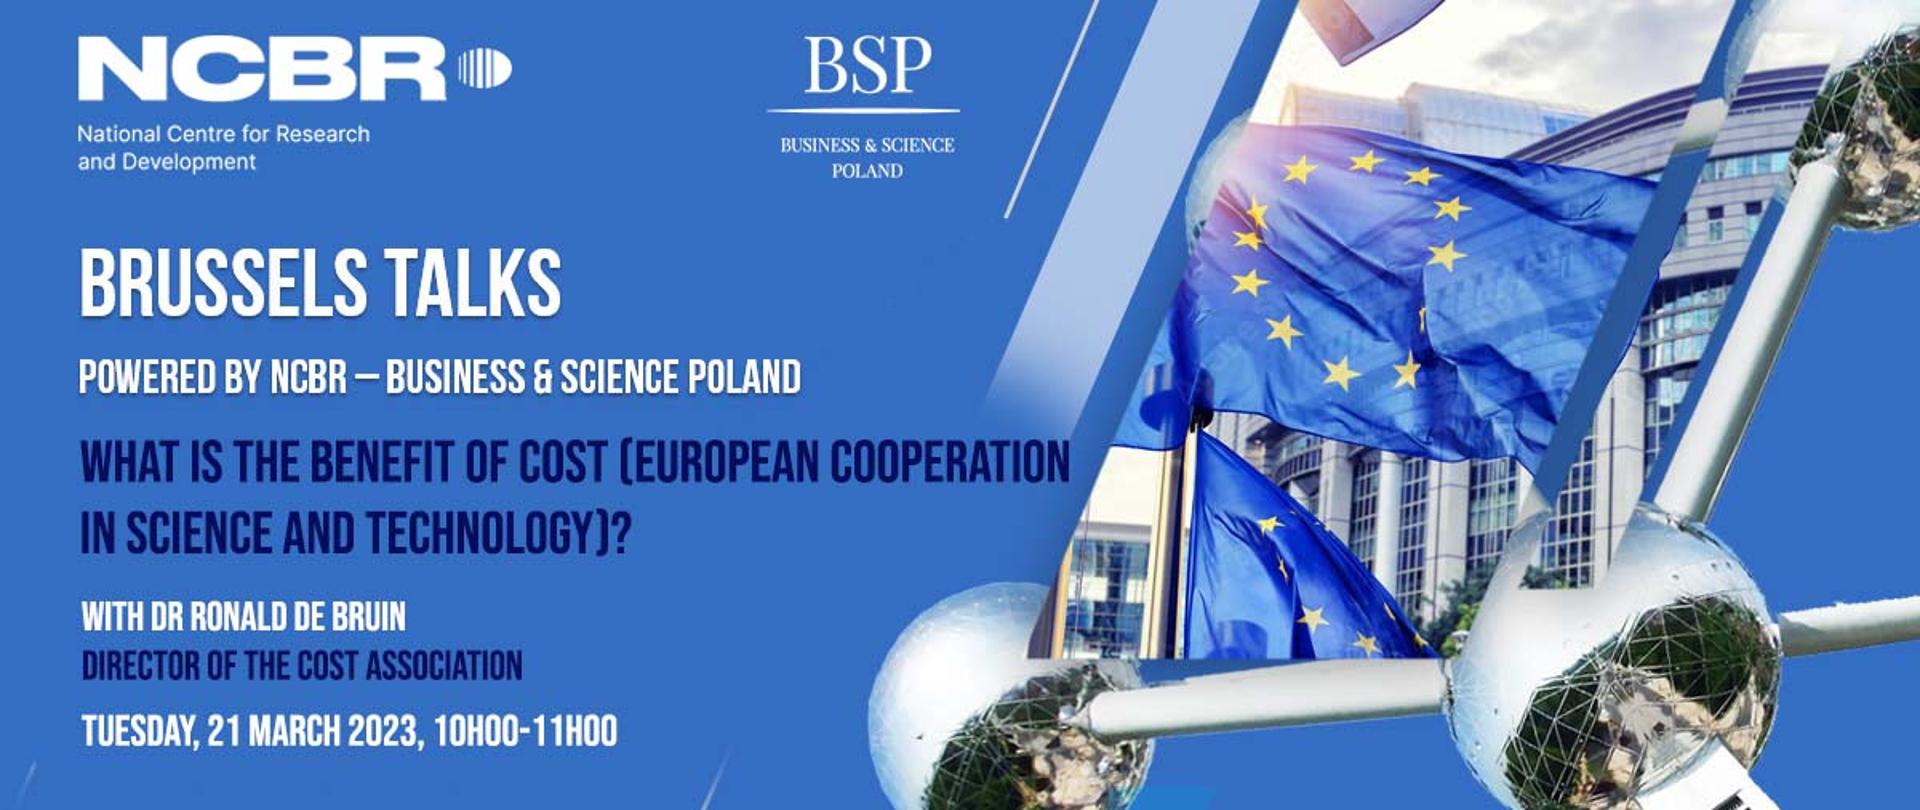 Brussels Talks: What is the benefit of COST (European Cooperation in Science and Technology)?